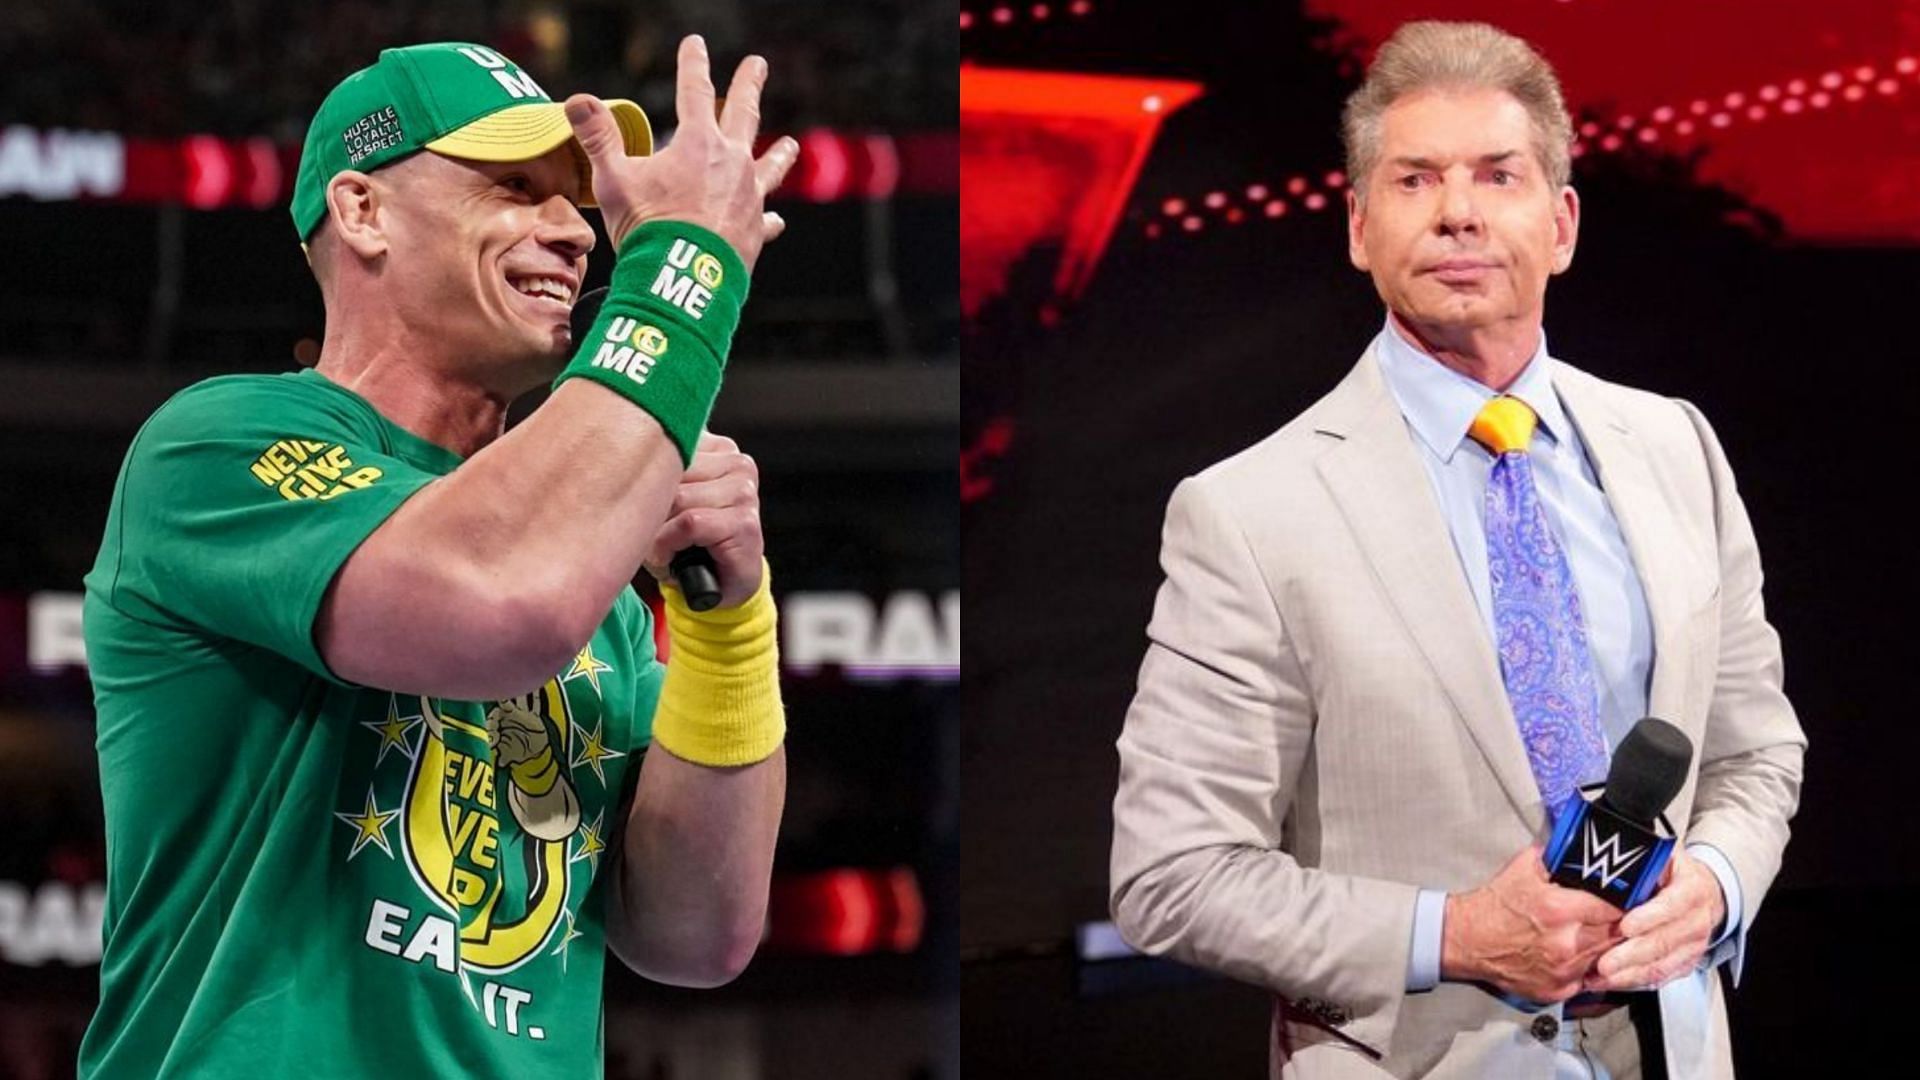 John Cena (left) and Vince McMahon (right)